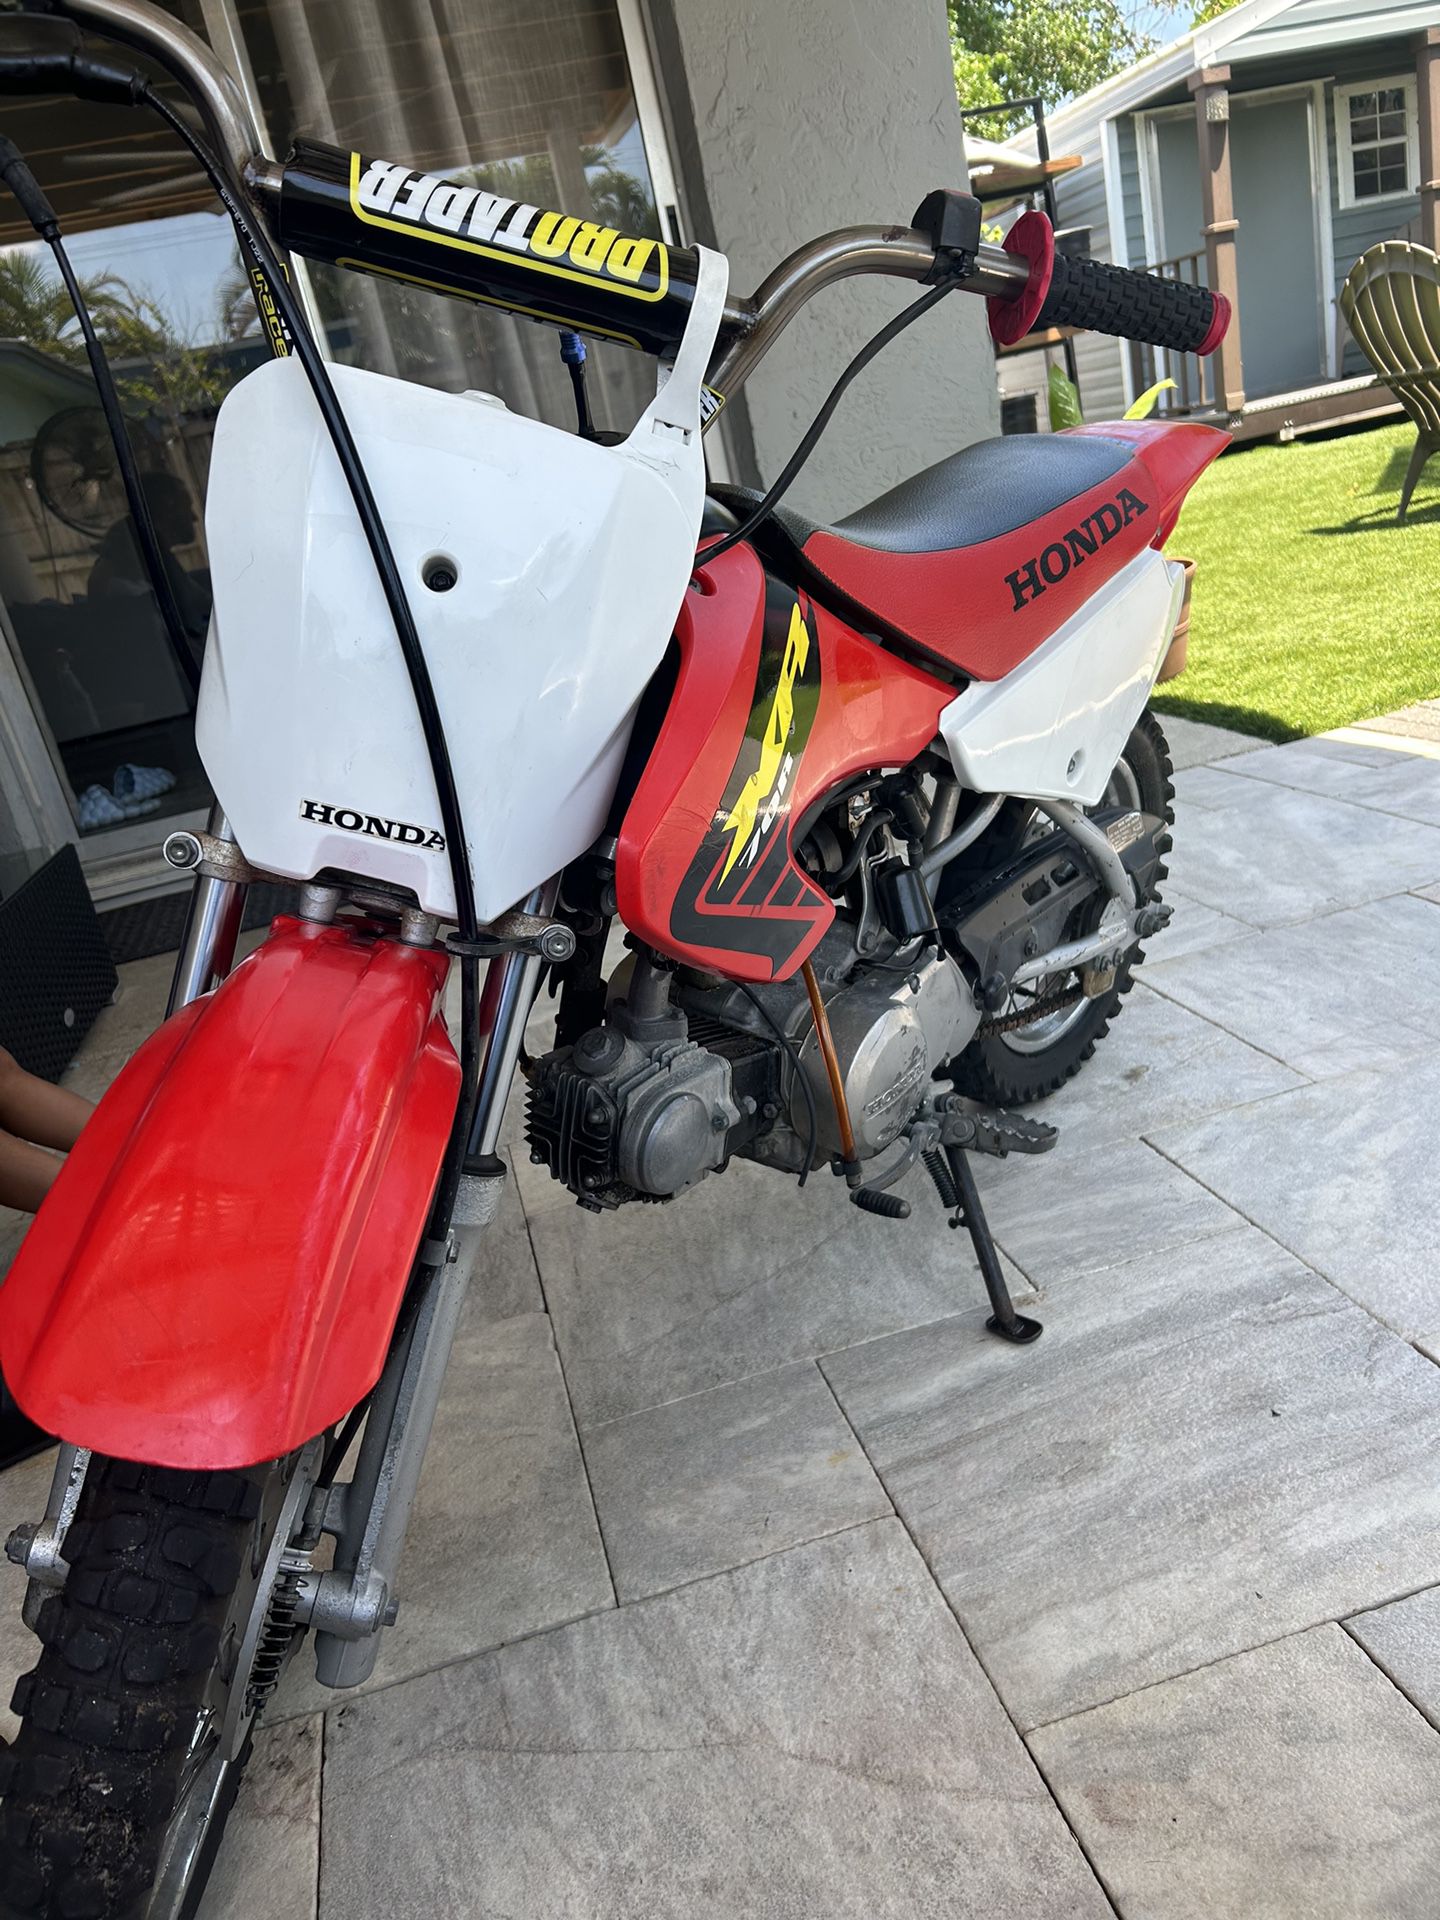 Honda Xr 70 R Dirtbike ! no mini bikes or doodlebugs so please don’t ask to trade